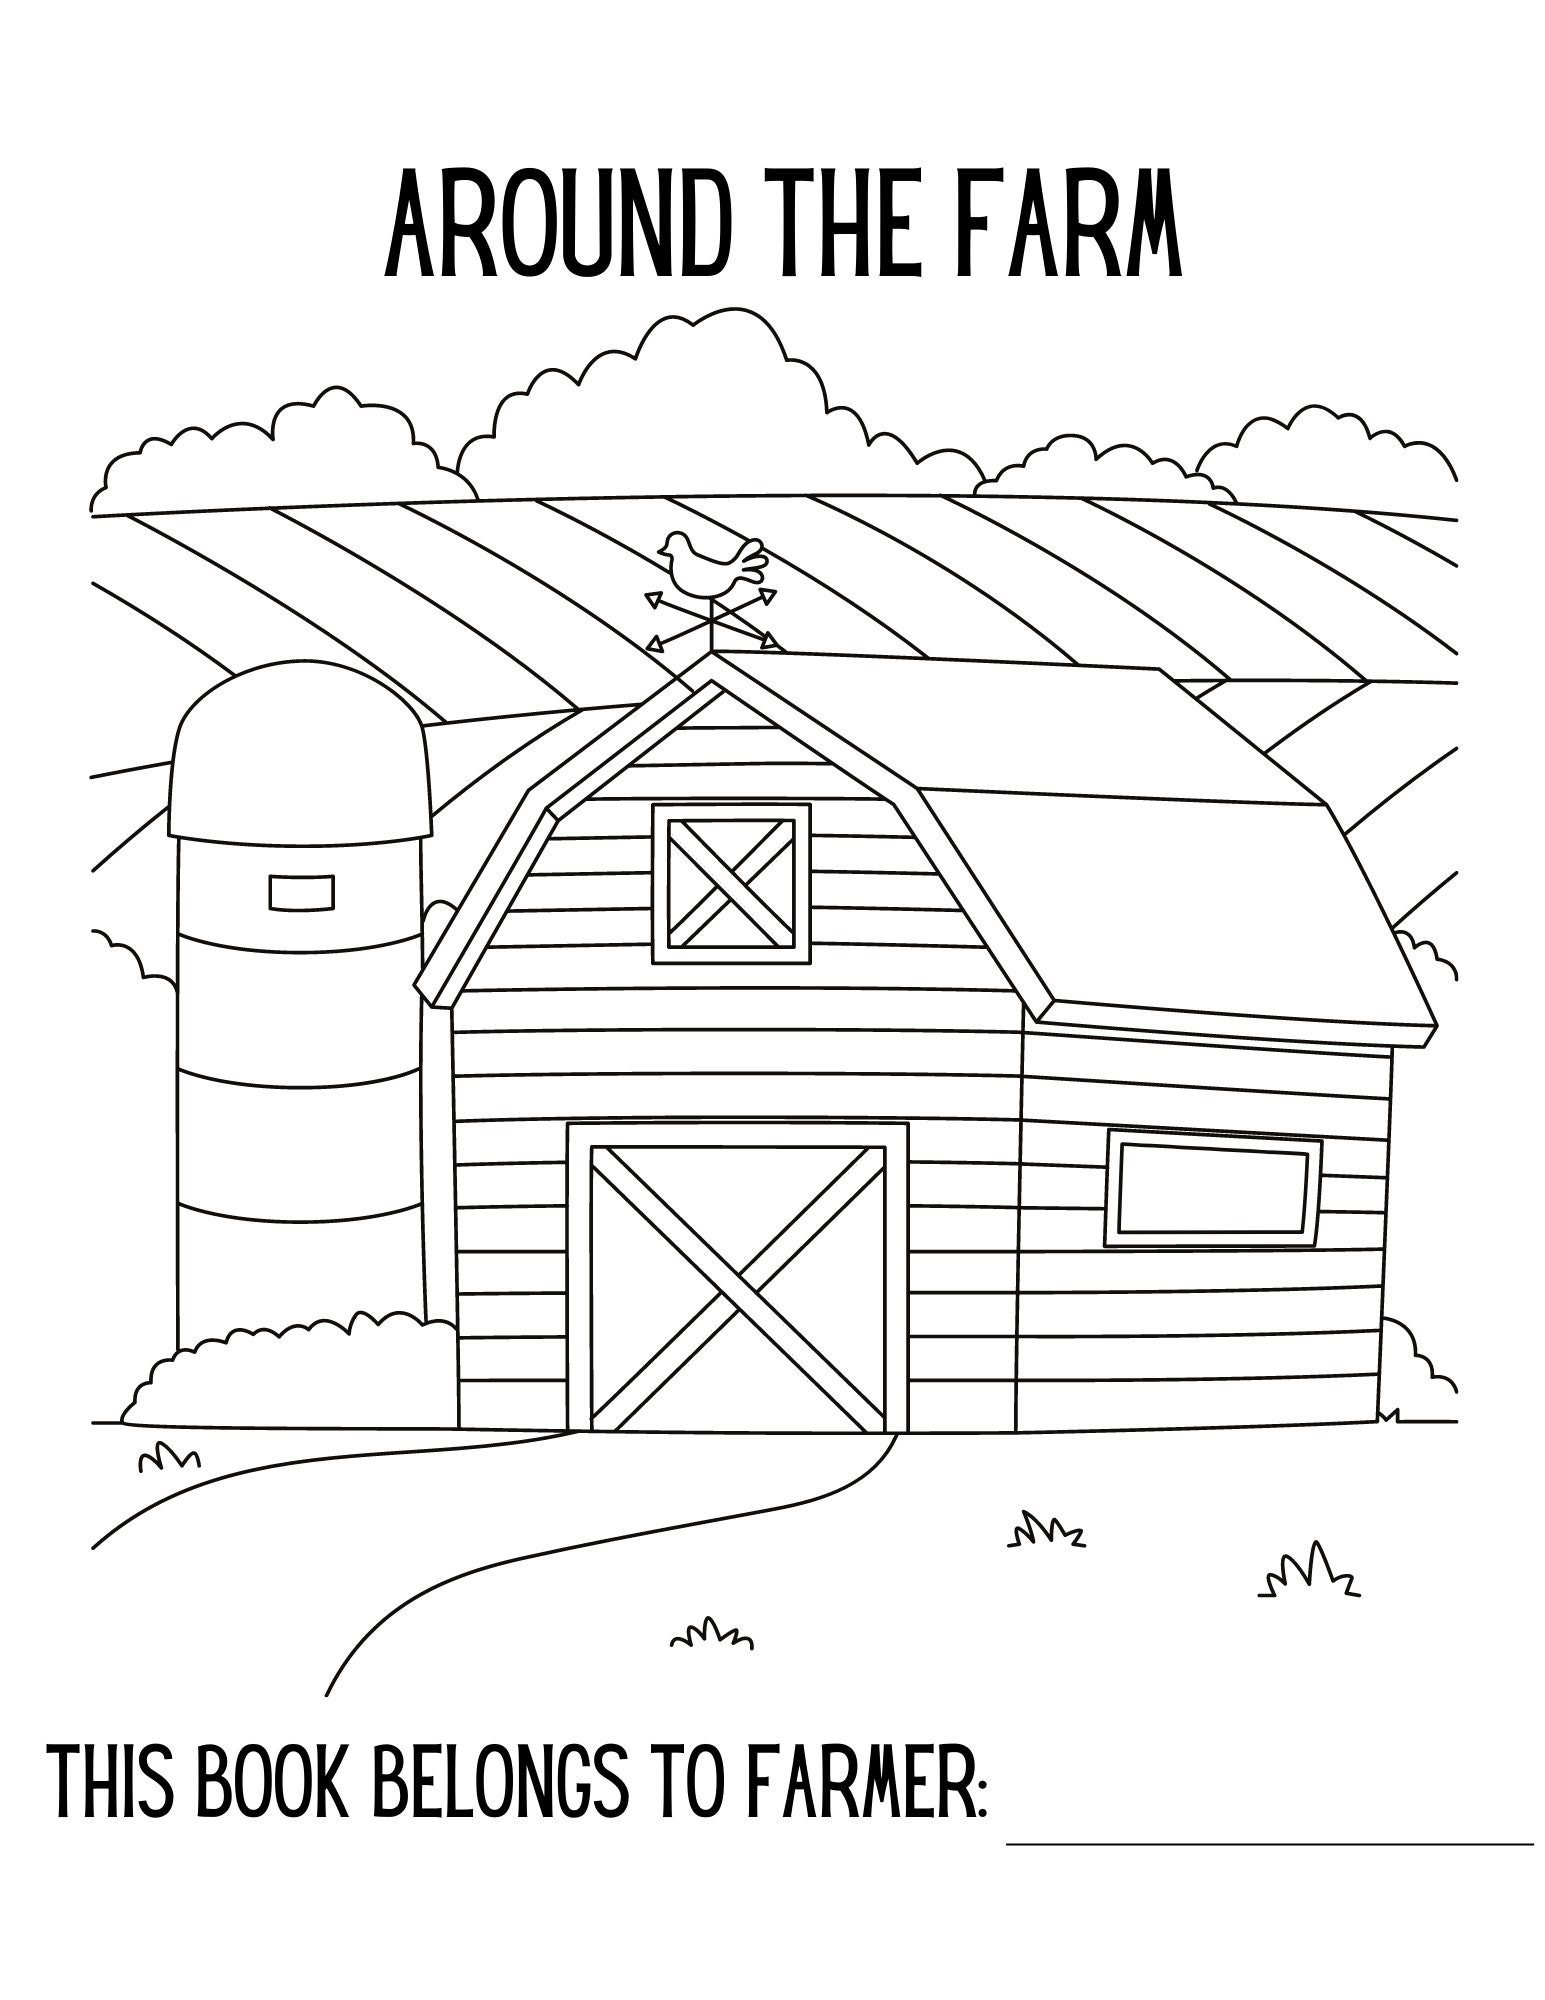 43 Pages Around the Farm Activity and Coloring Sheets - Etsy